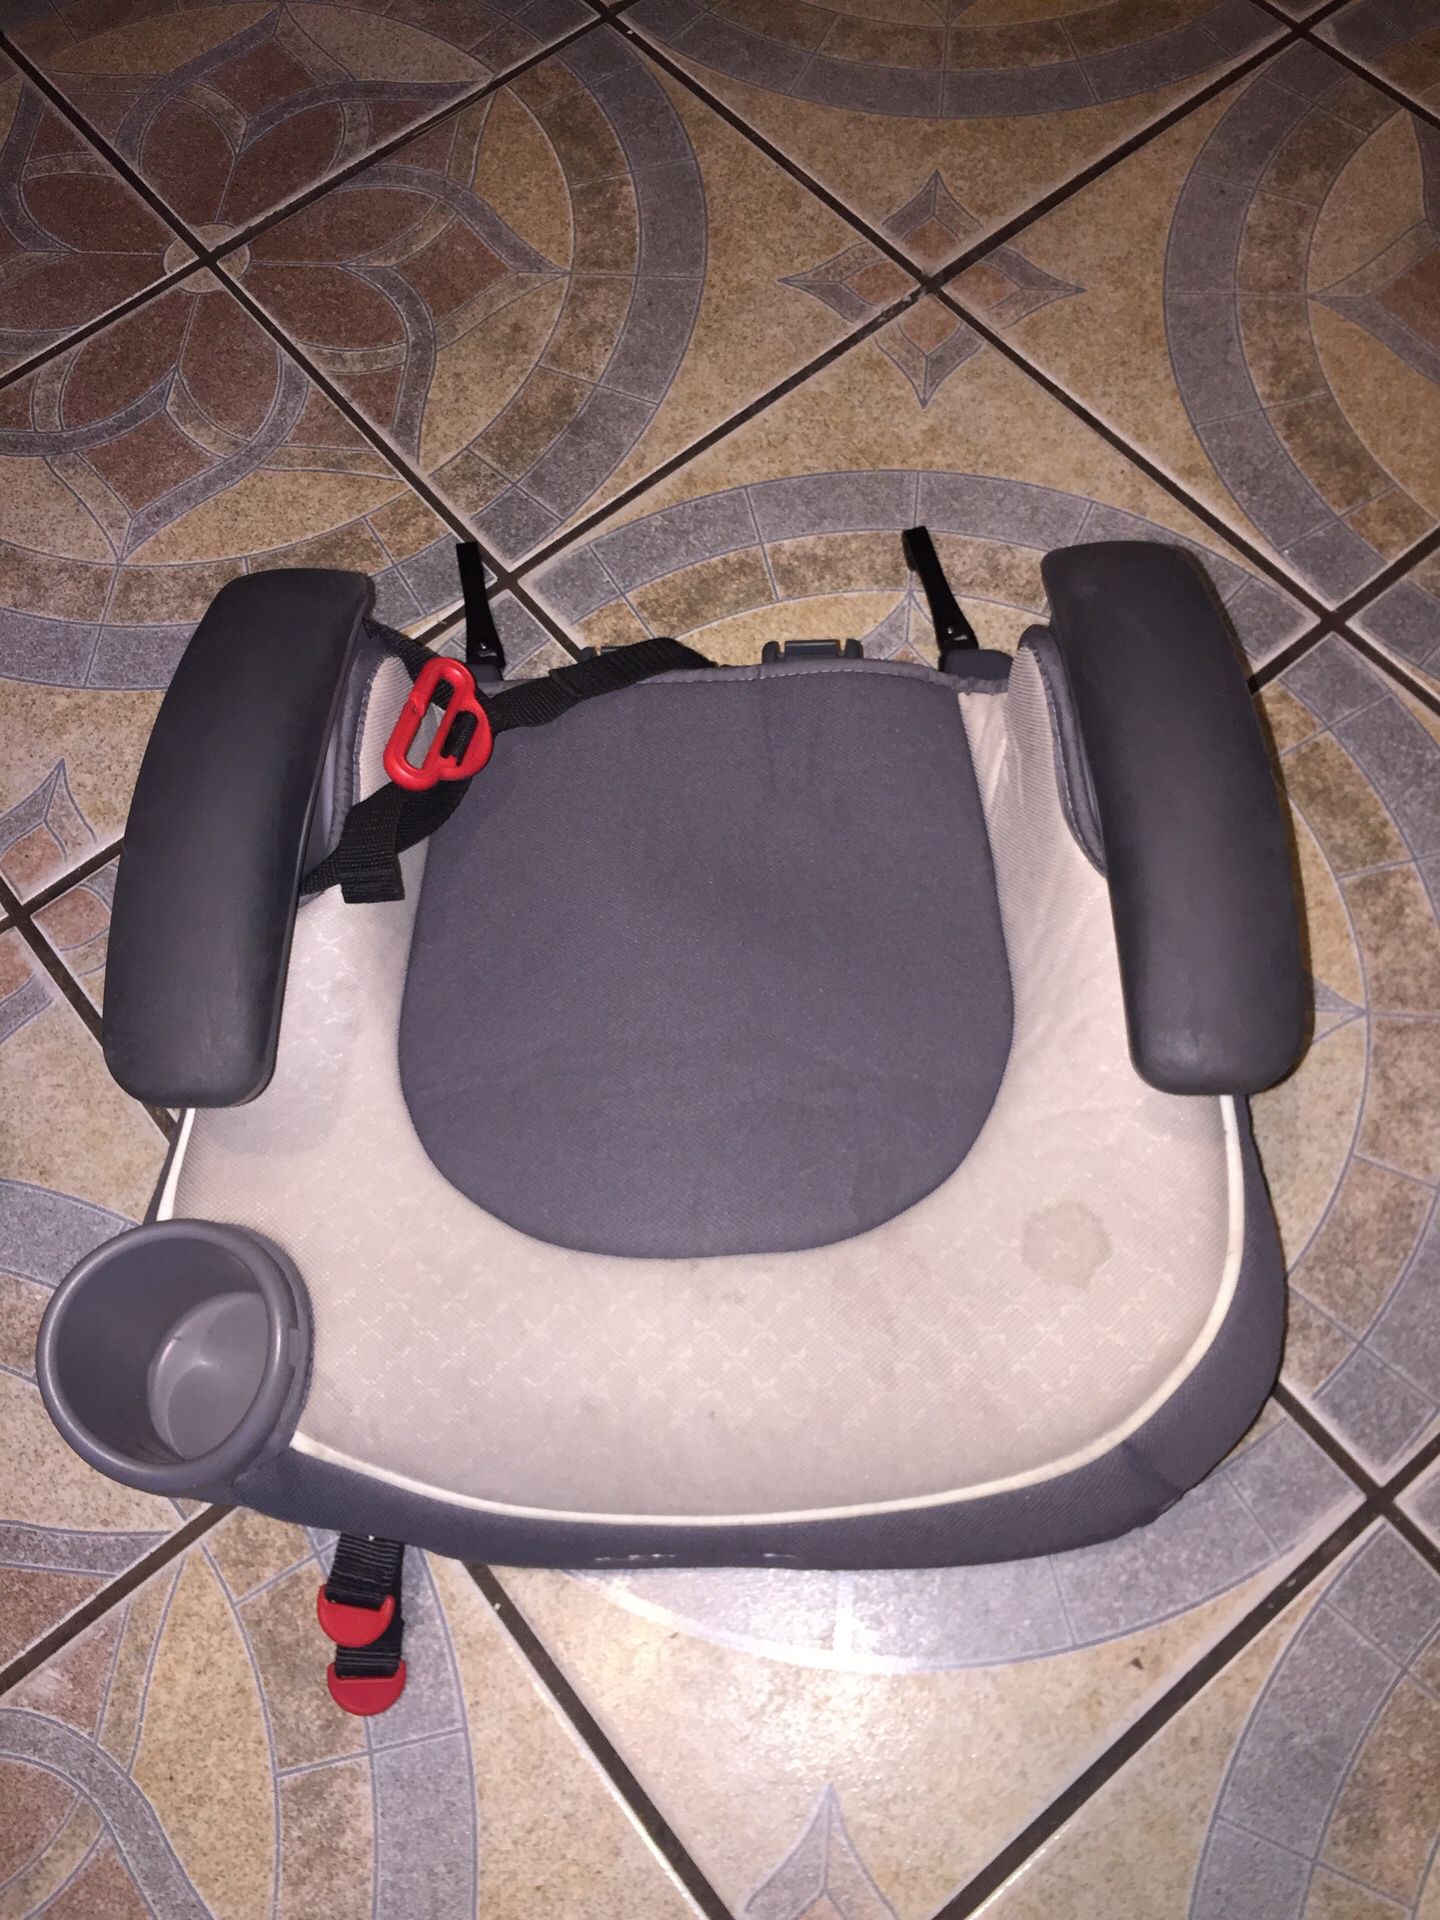 Graco Affix booster seat with latches